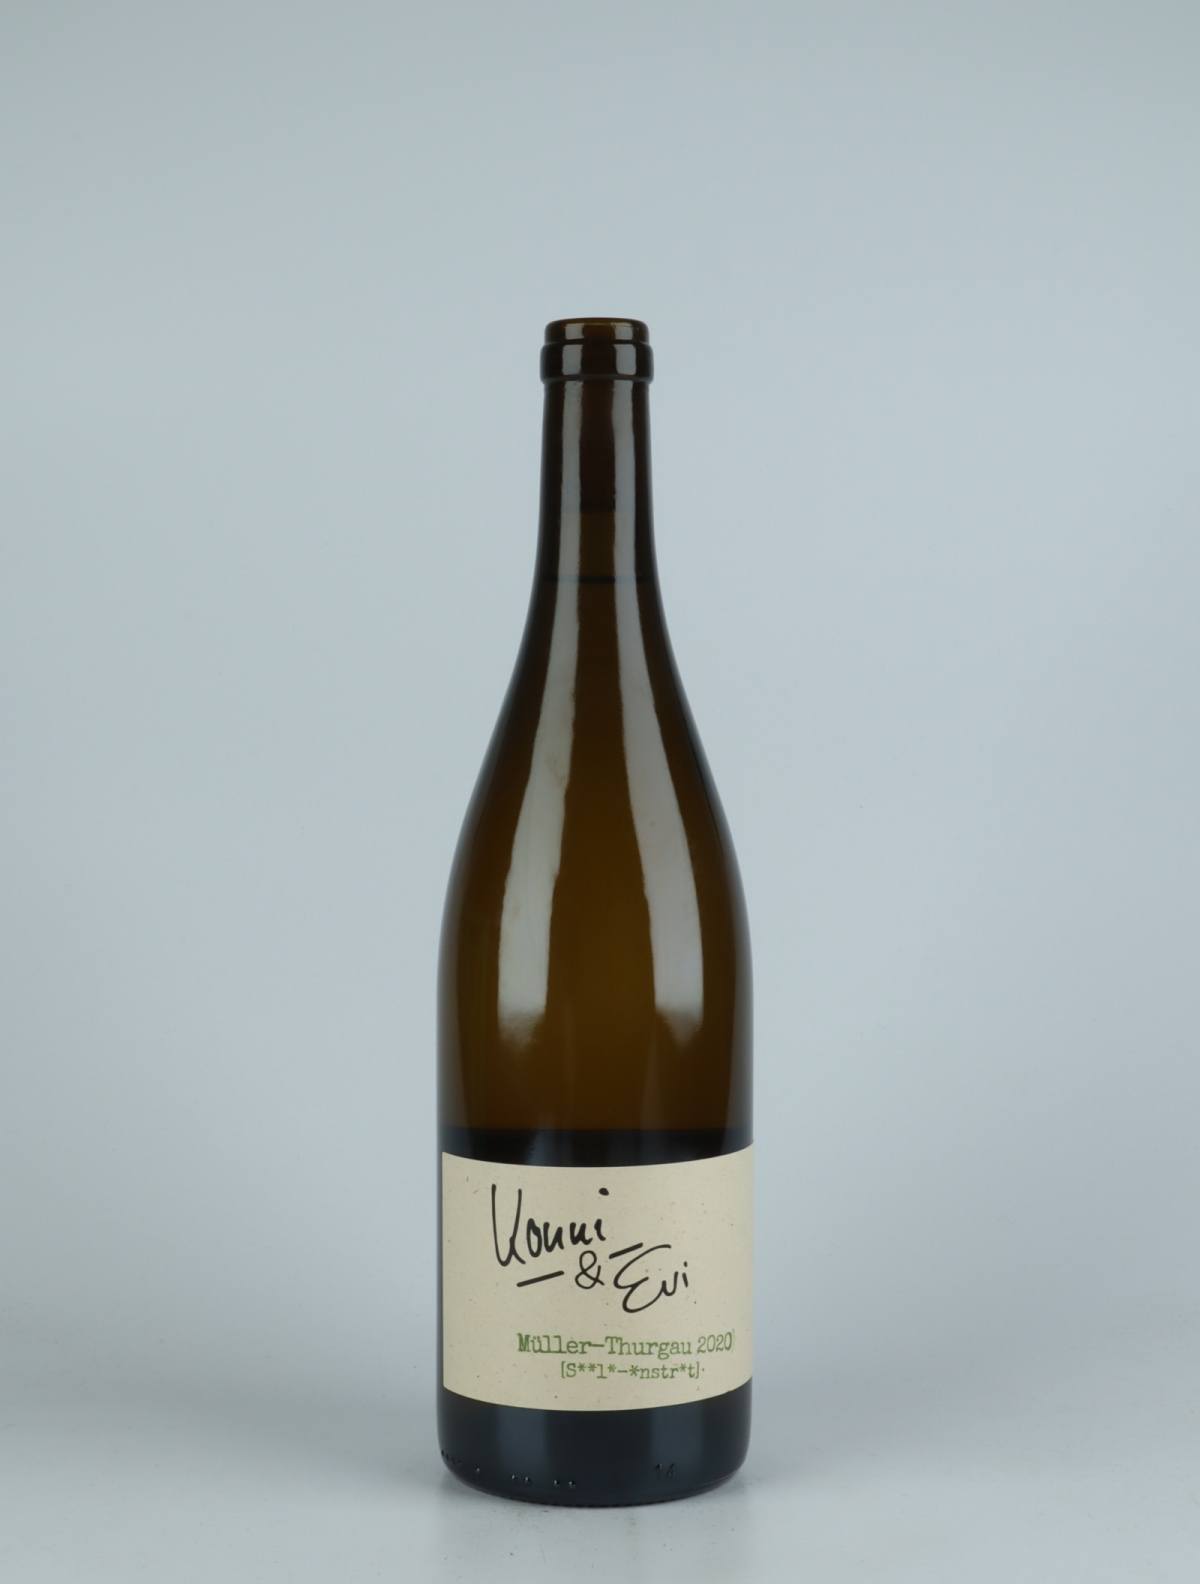 A bottle 2020 Müller-Thurgau White wine from Konni & Evi, Saale-Unstrut in Germany